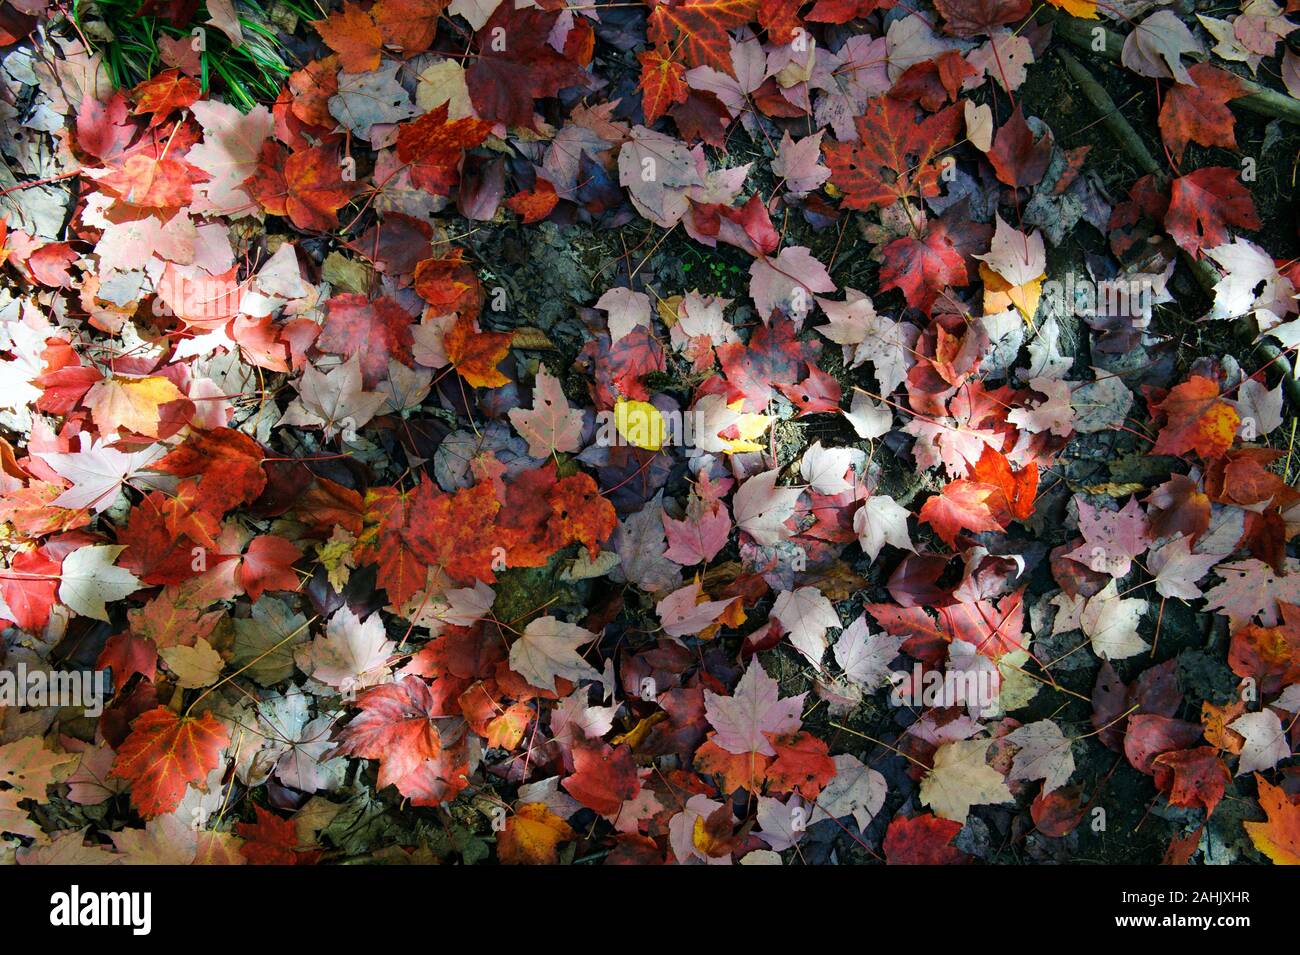 Fallen maple leaves on forest floor in autumn. Province of Quebec, Canada. Stock Photo